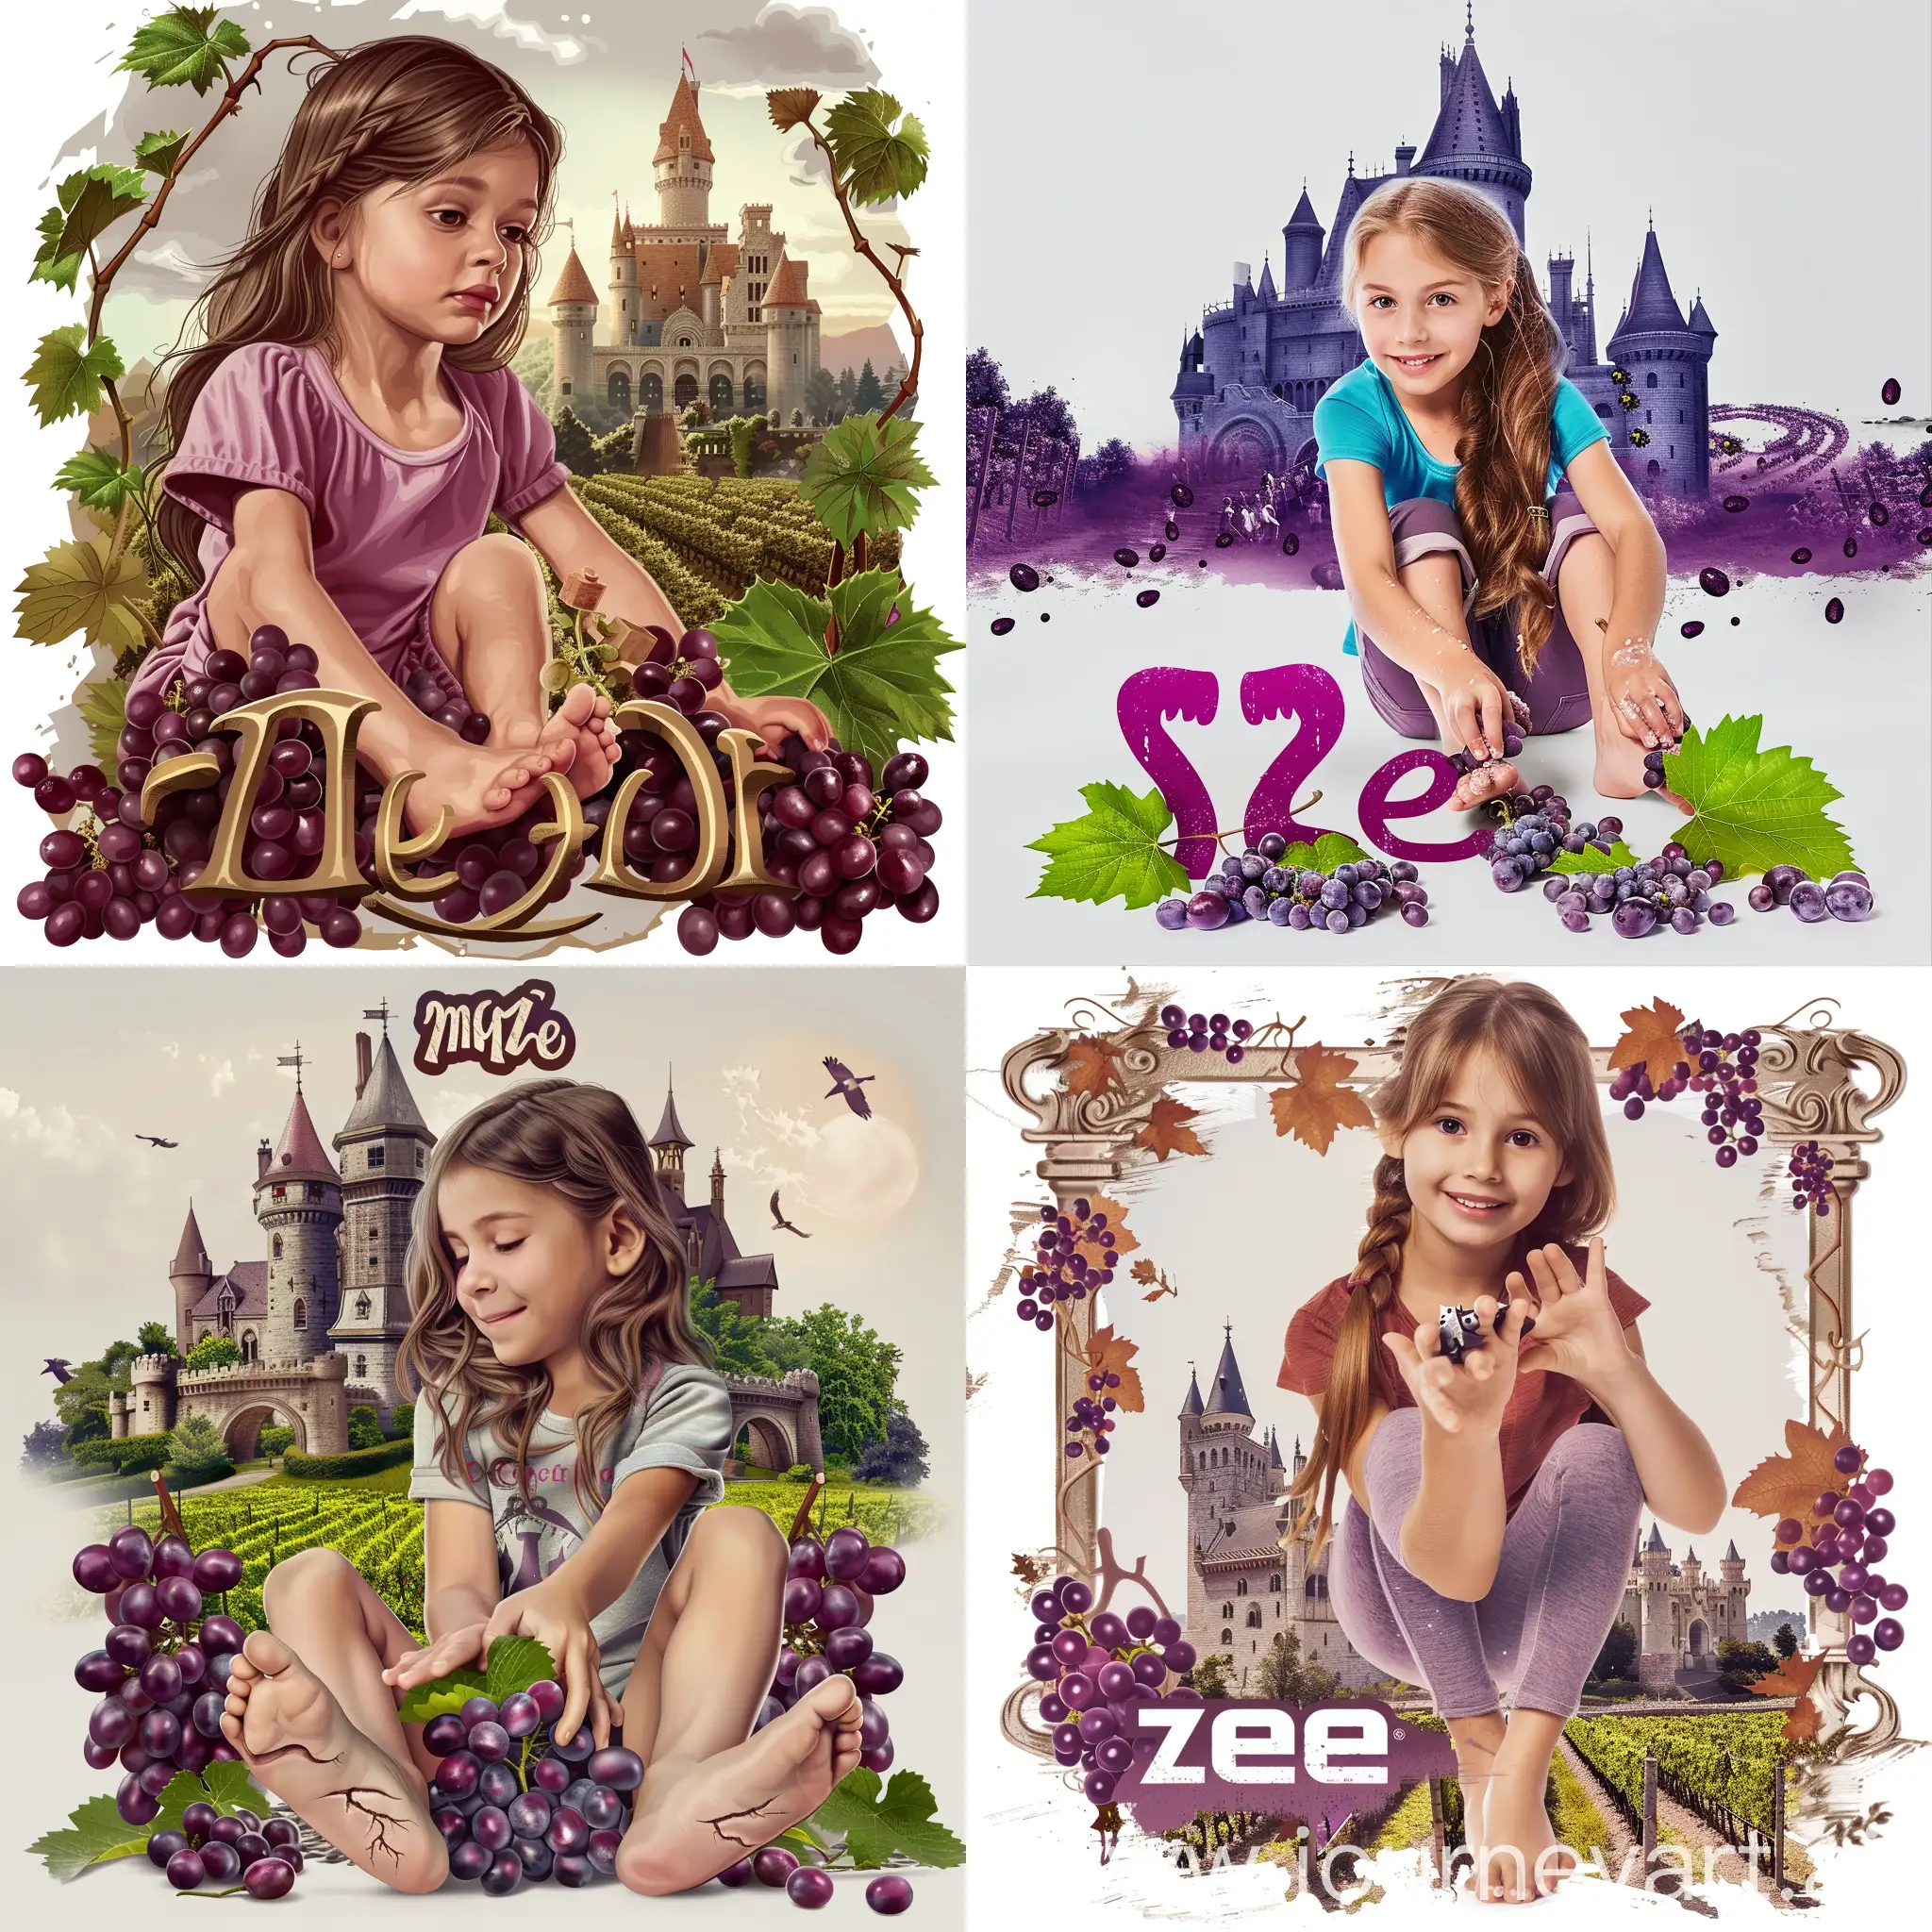 a young girl is crushing grapes with her feet in front of zile castle type realistic logo